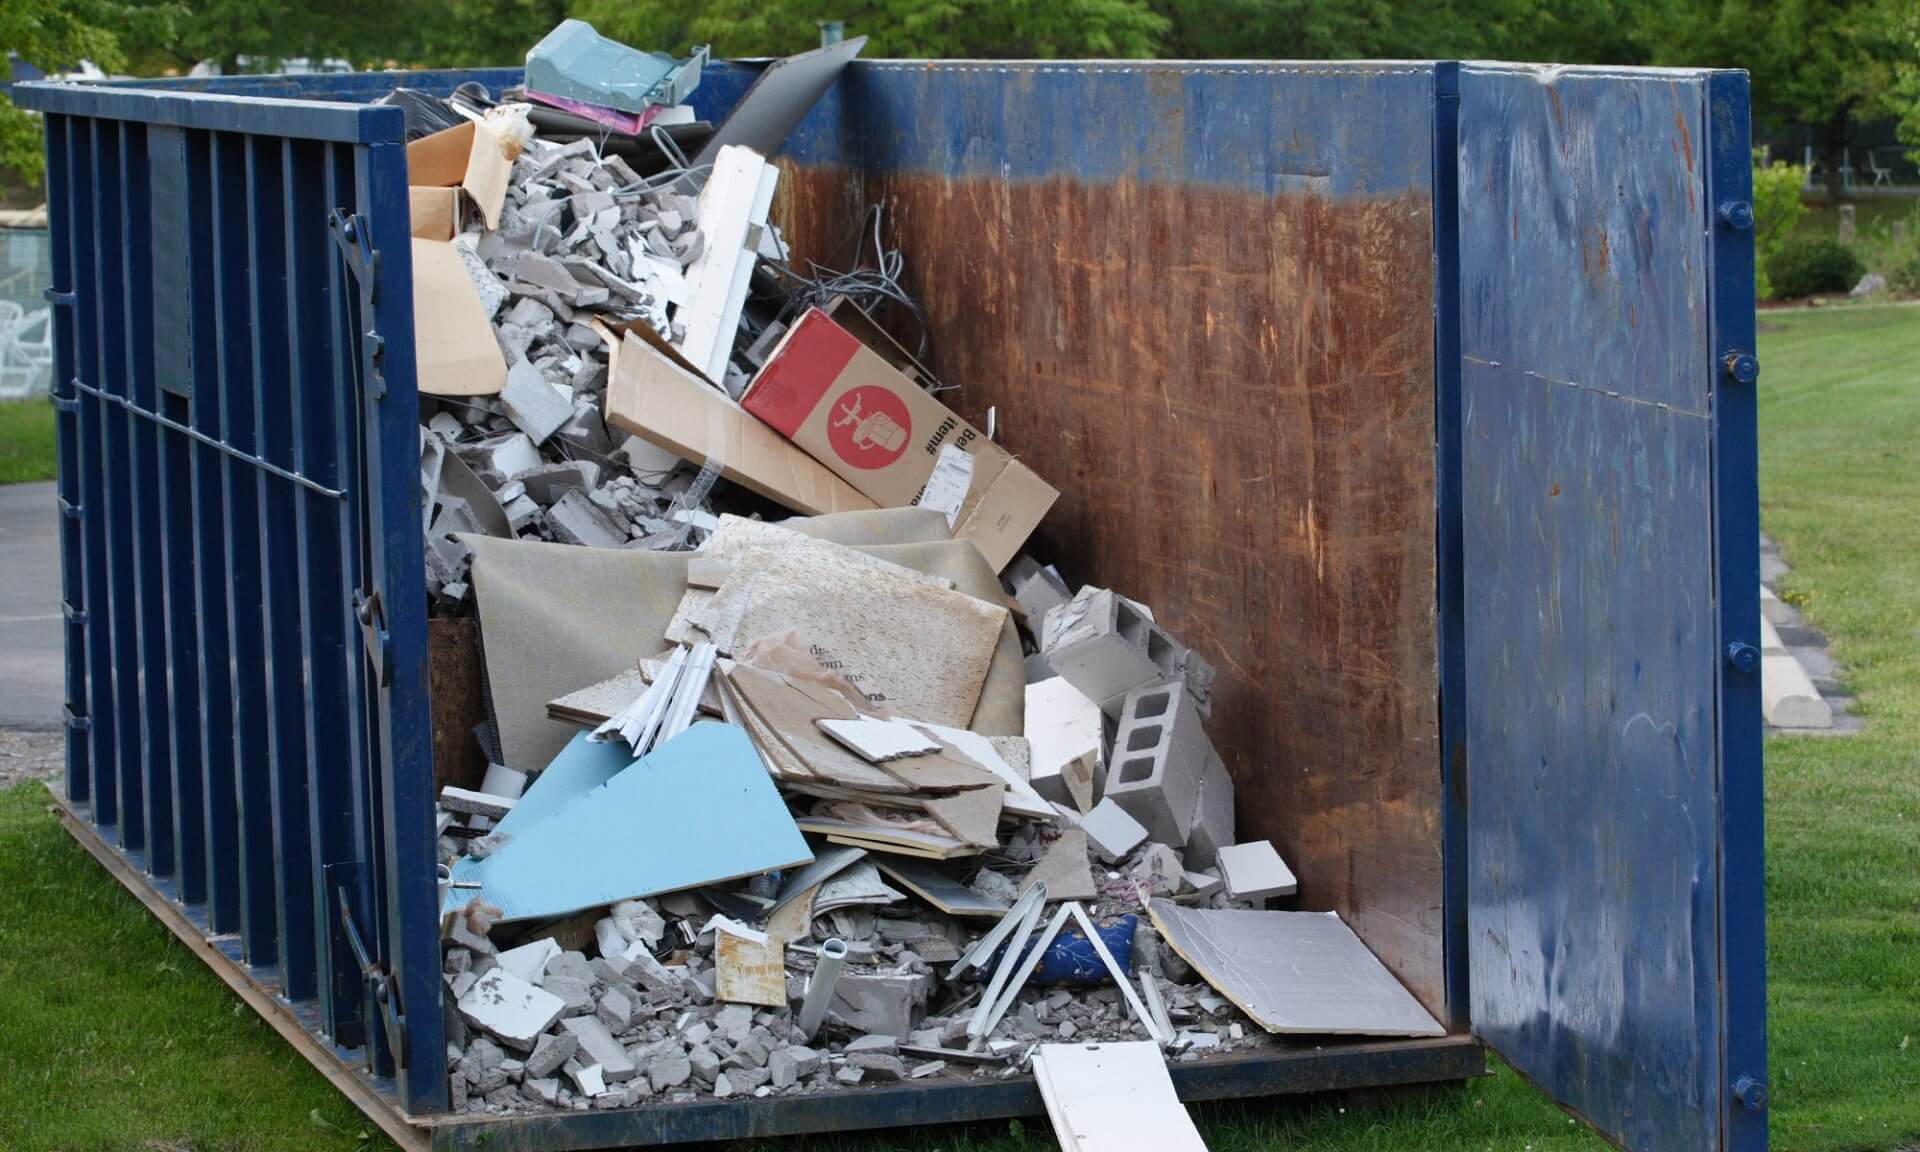 Spring Cleaning Dumpster Services-Colorado Dumpster Services of Fort Collins